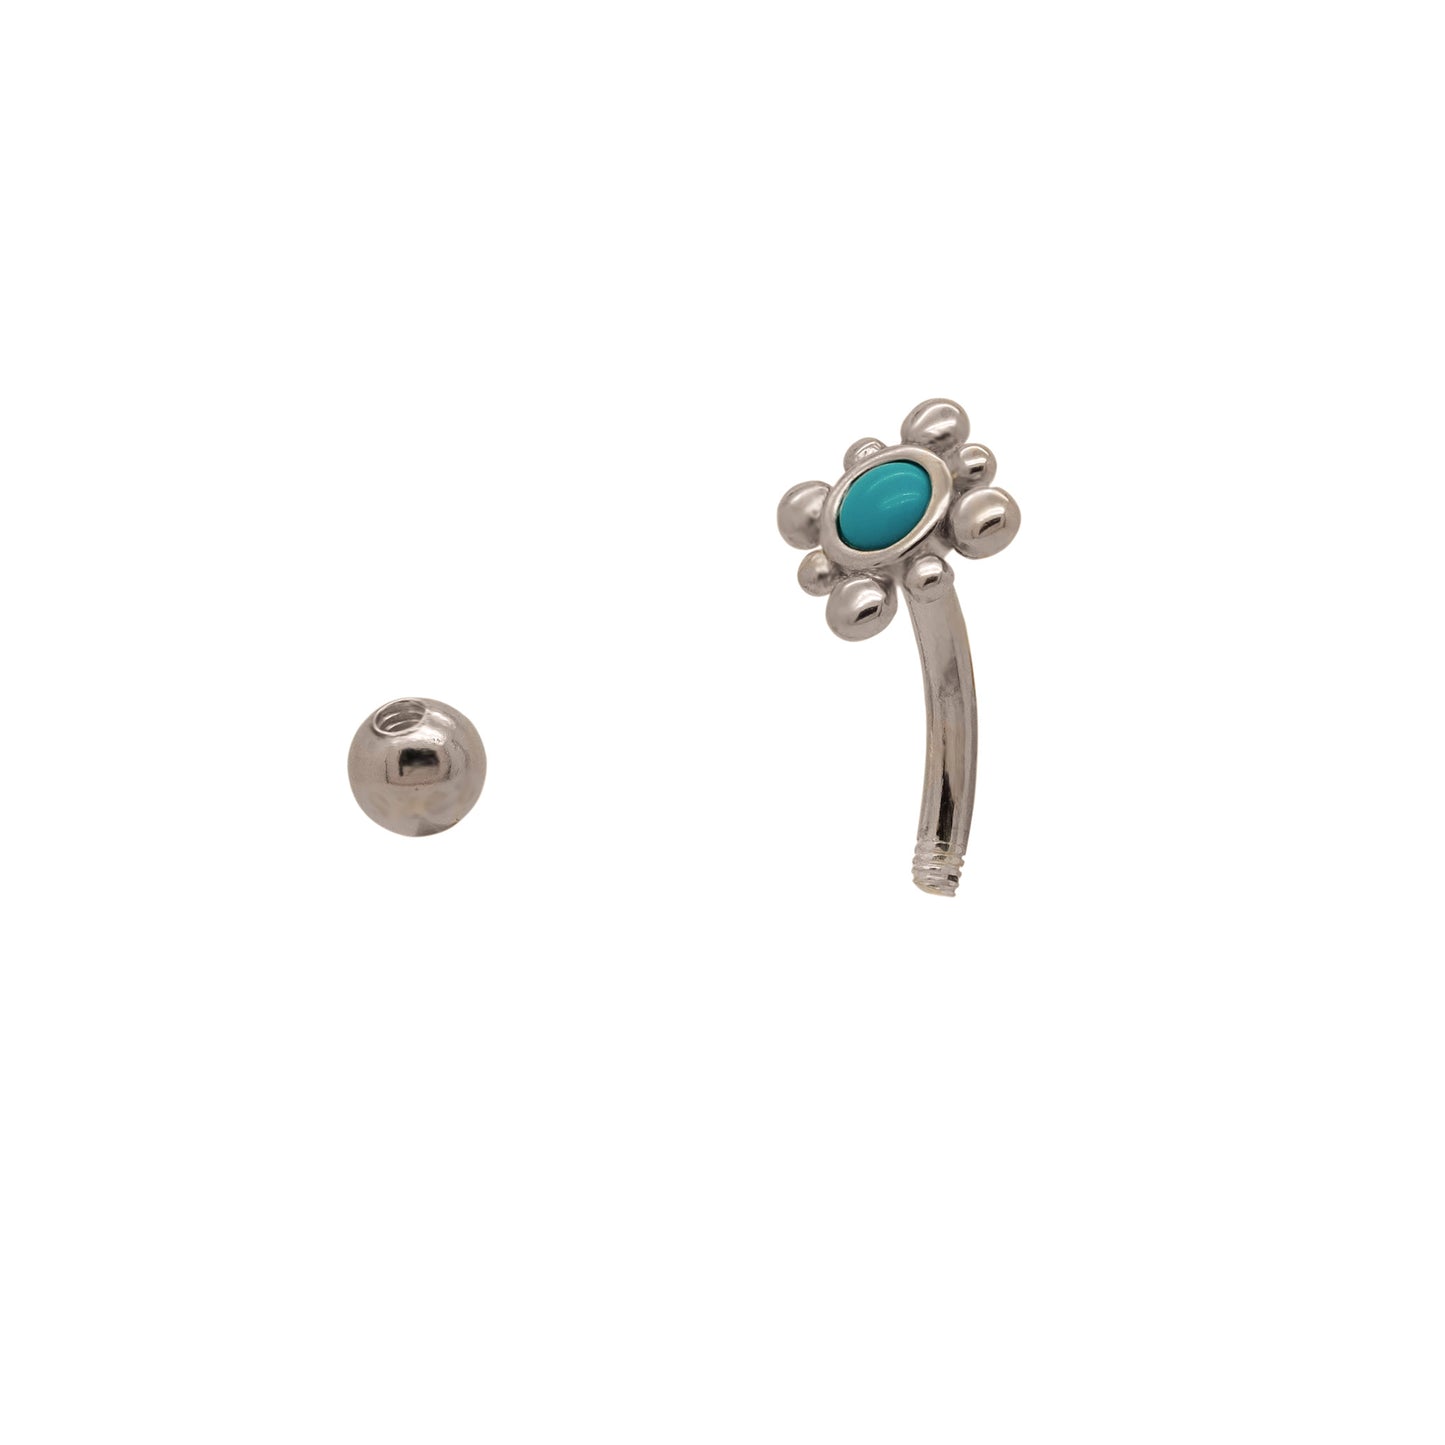 Solid 925 Silver | 14G Petite Sun Turquoise Reverse Belly Ring | 6mm 1/4" 8mm 5/16" 10mm 3/8" - Sturdy South